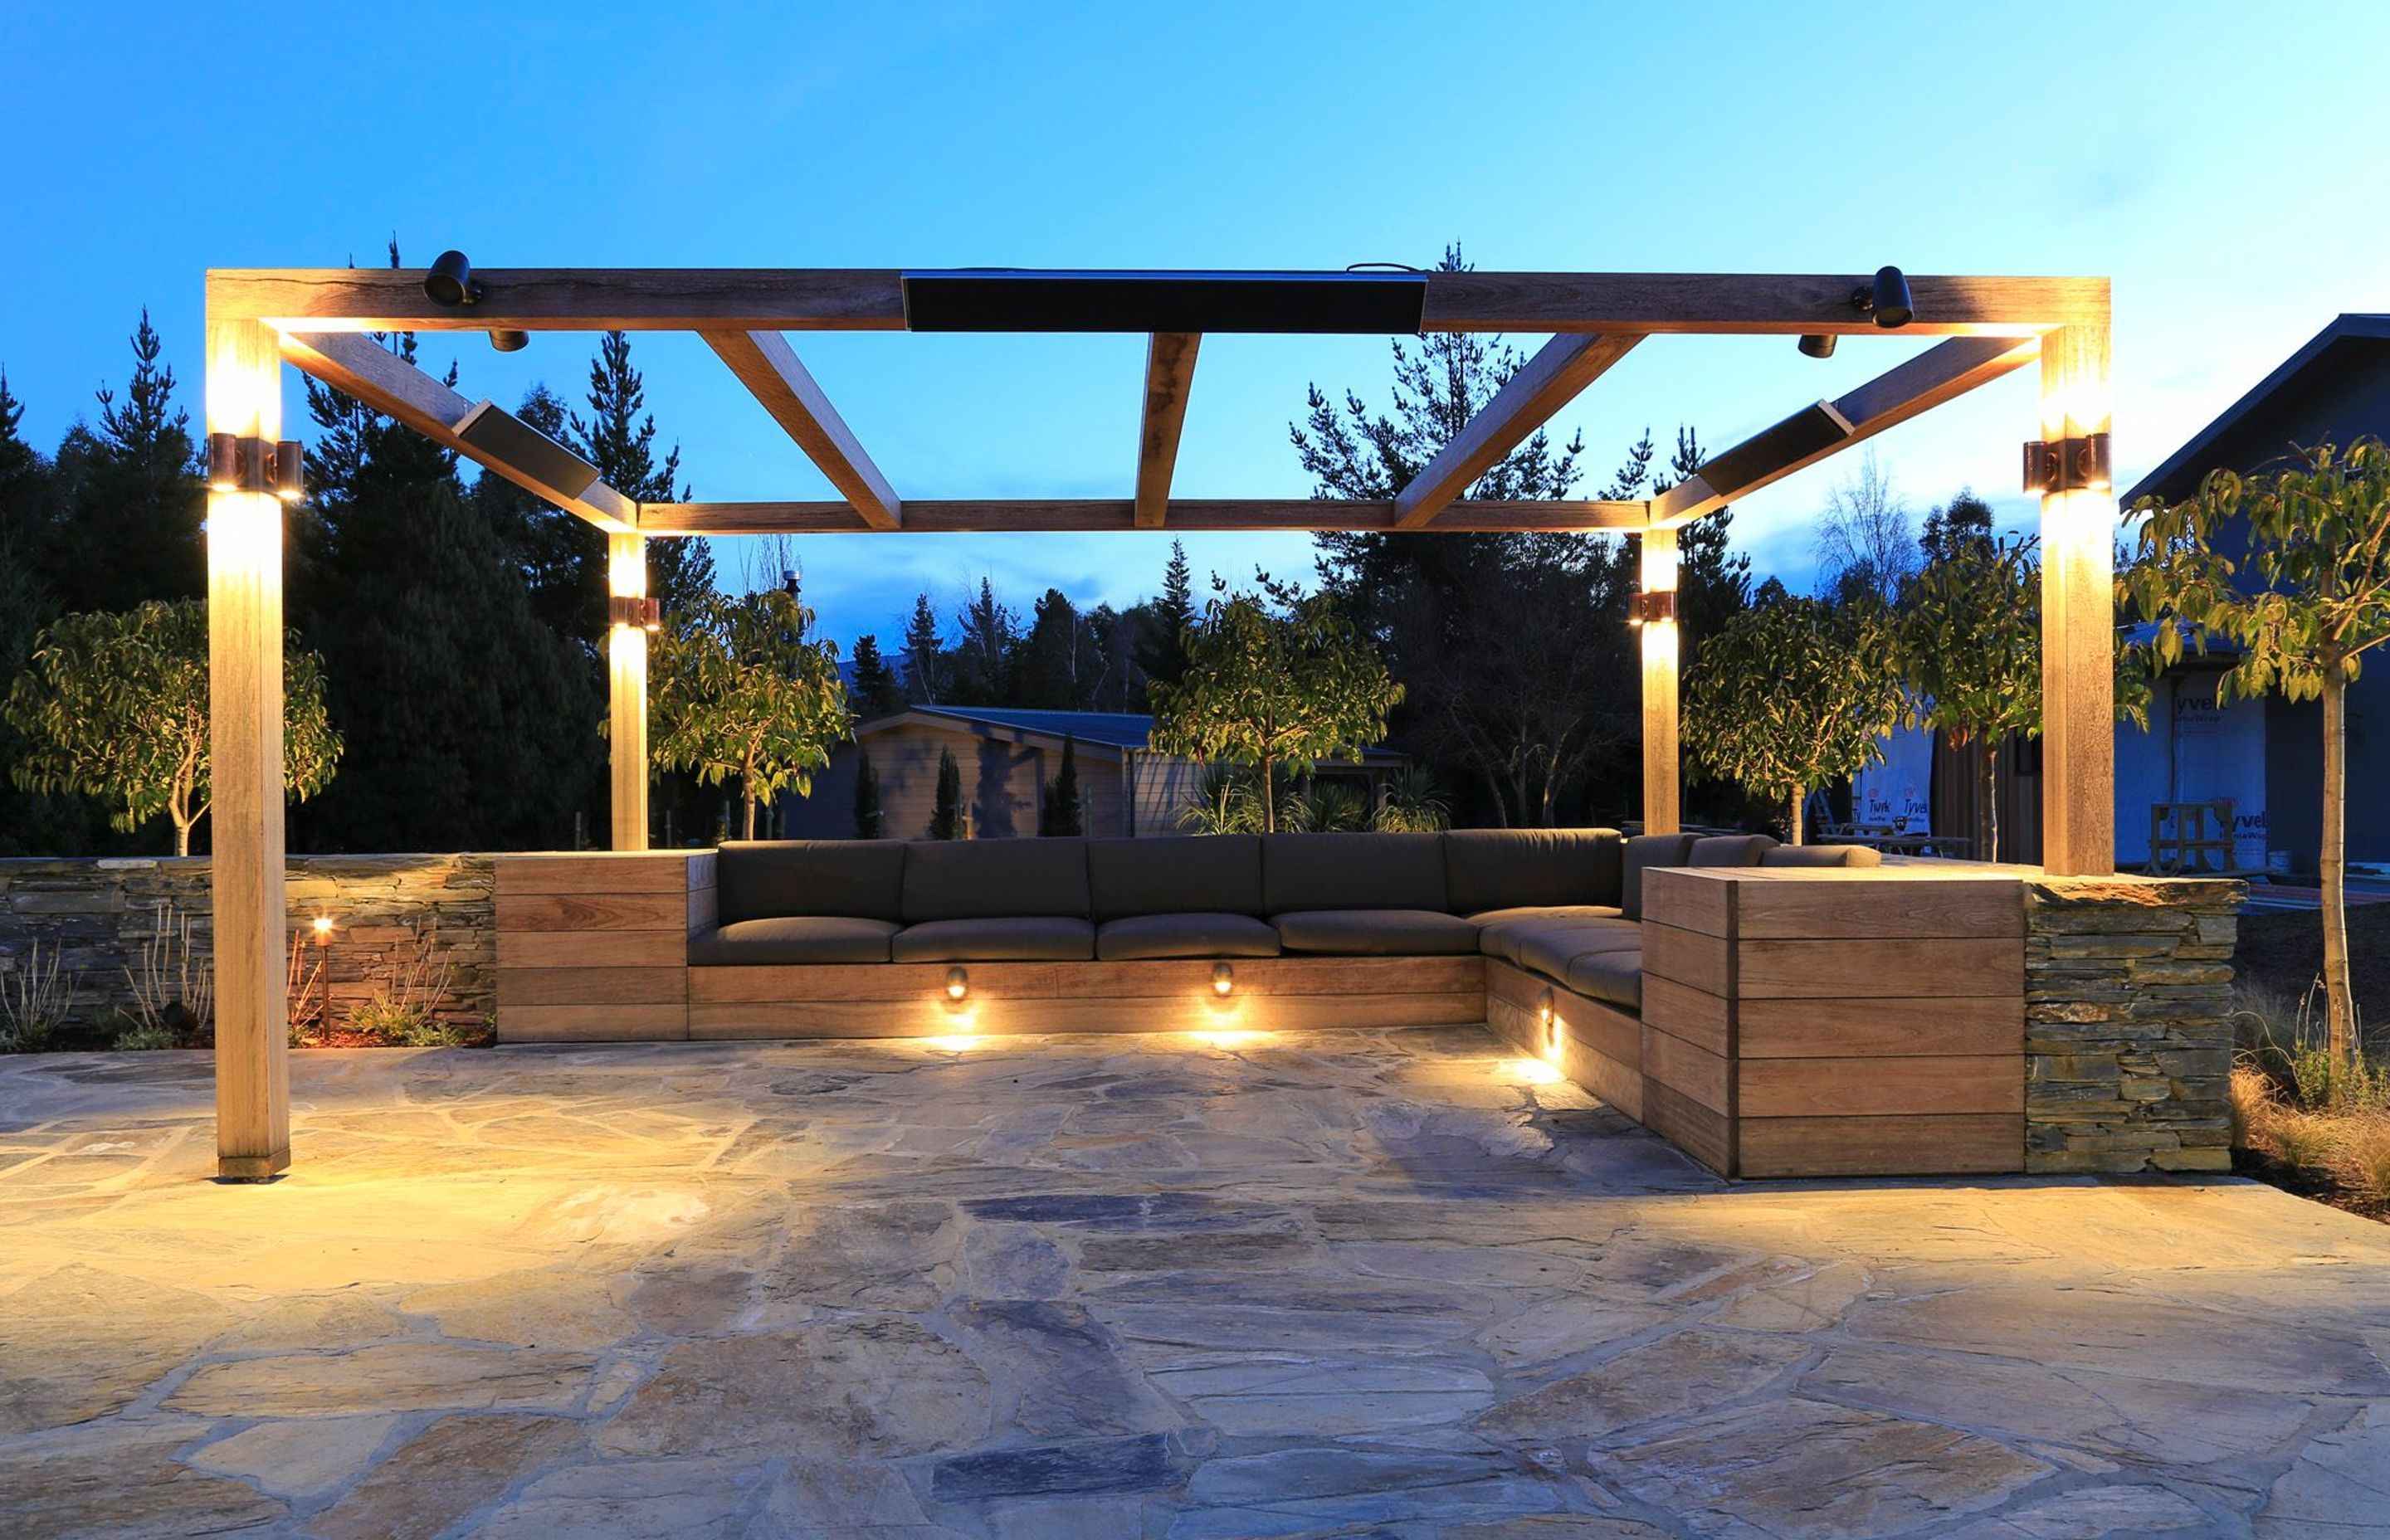 Hunza's lighting products range IP 66 to IP 67, making them ideal for landscape lighting designs.